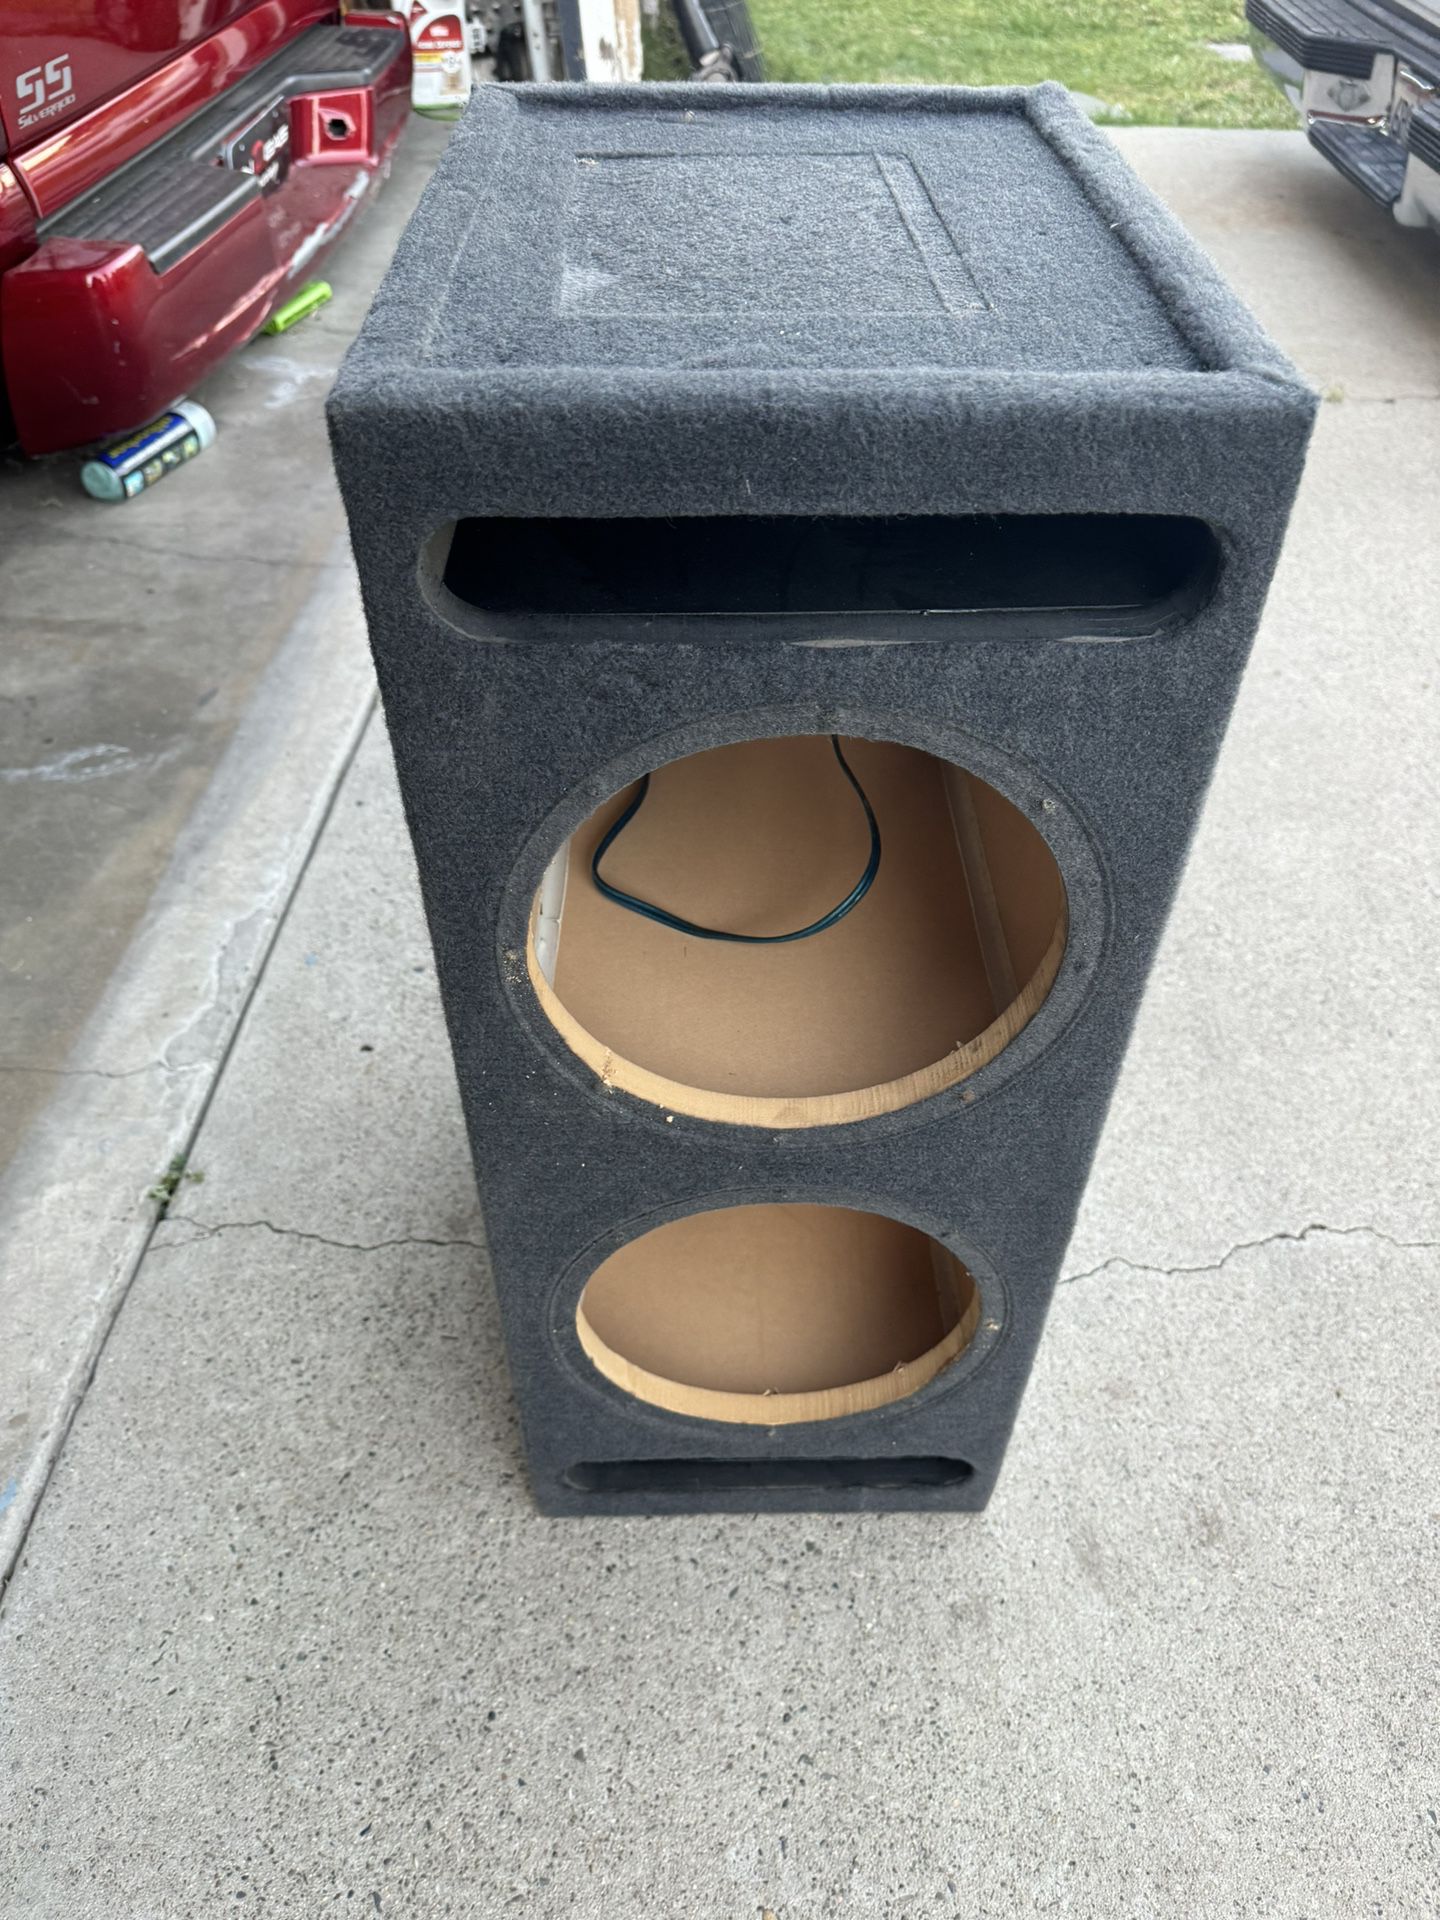 Ported Subwoofer Box For 2 10s